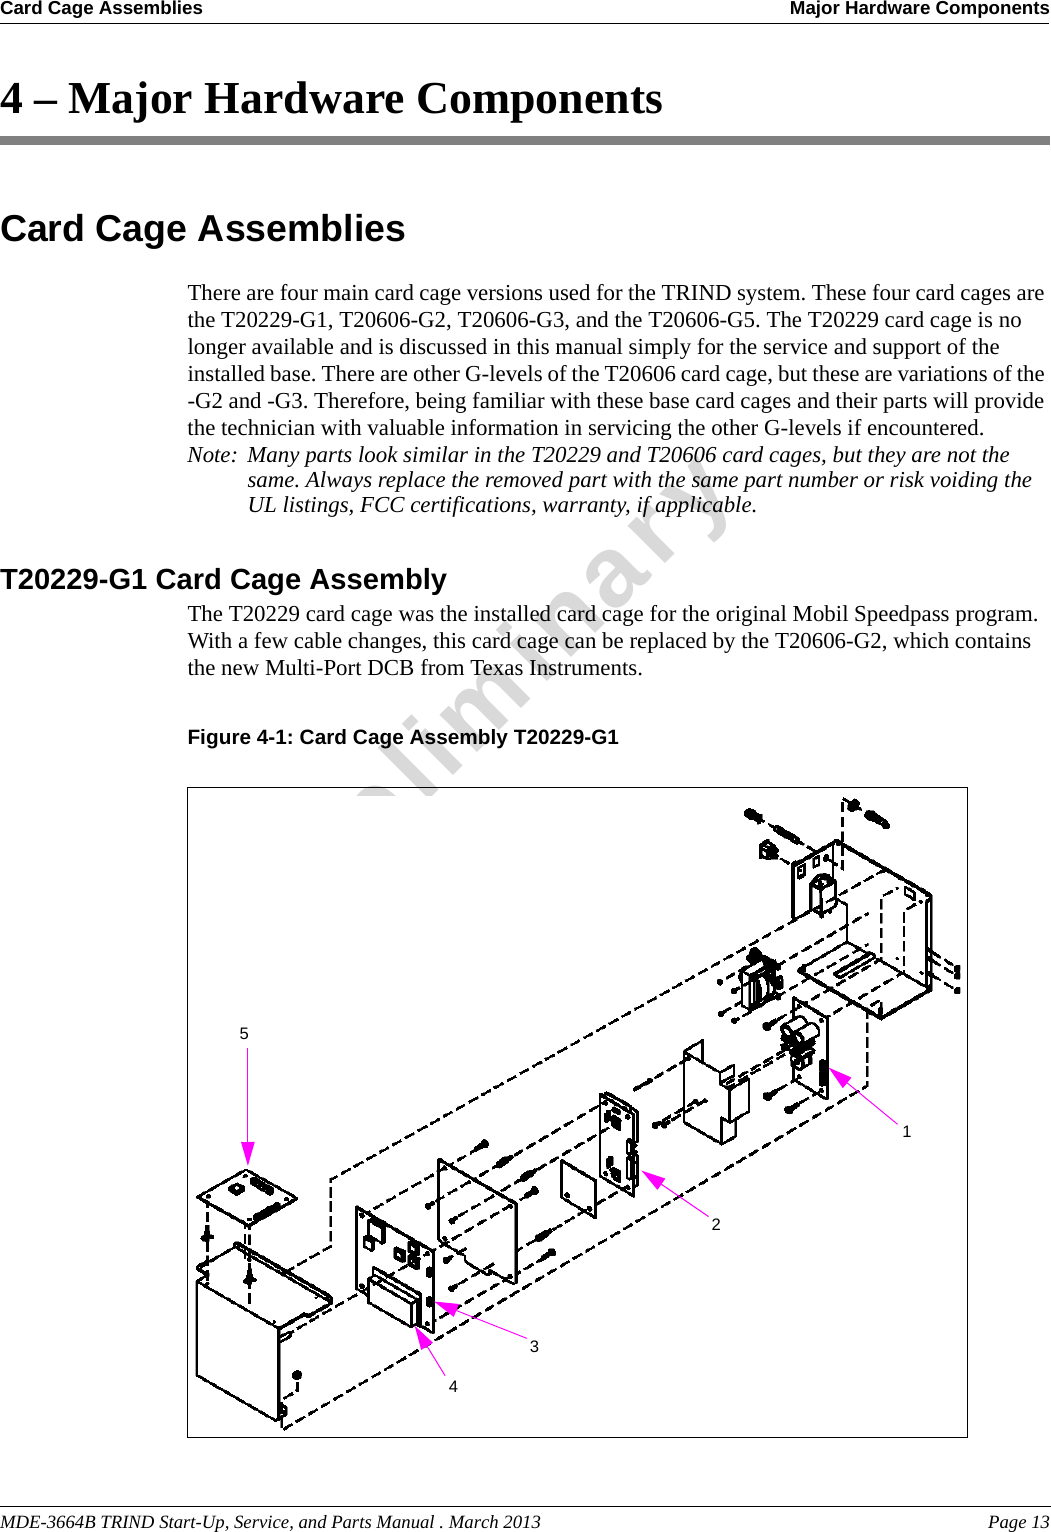 MDE-3664B TRIND Start-Up, Service, and Parts Manual . March 2013 Page 13Card Cage Assemblies Major Hardware ComponentsPreliminary4 – Major Hardware ComponentsCard Cage AssembliesThere are four main card cage versions used for the TRIND system. These four card cages are the T20229-G1, T20606-G2, T20606-G3, and the T20606-G5. The T20229 card cage is no longer available and is discussed in this manual simply for the service and support of the installed base. There are other G-levels of the T20606 card cage, but these are variations of the -G2 and -G3. Therefore, being familiar with these base card cages and their parts will provide the technician with valuable information in servicing the other G-levels if encountered. Note: Many parts look similar in the T20229 and T20606 card cages, but they are not the same. Always replace the removed part with the same part number or risk voiding the UL listings, FCC certifications, warranty, if applicable.T20229-G1 Card Cage AssemblyThe T20229 card cage was the installed card cage for the original Mobil Speedpass program. With a few cable changes, this card cage can be replaced by the T20606-G2, which contains the new Multi-Port DCB from Texas Instruments.Figure 4-1: Card Cage Assembly T20229-G112354